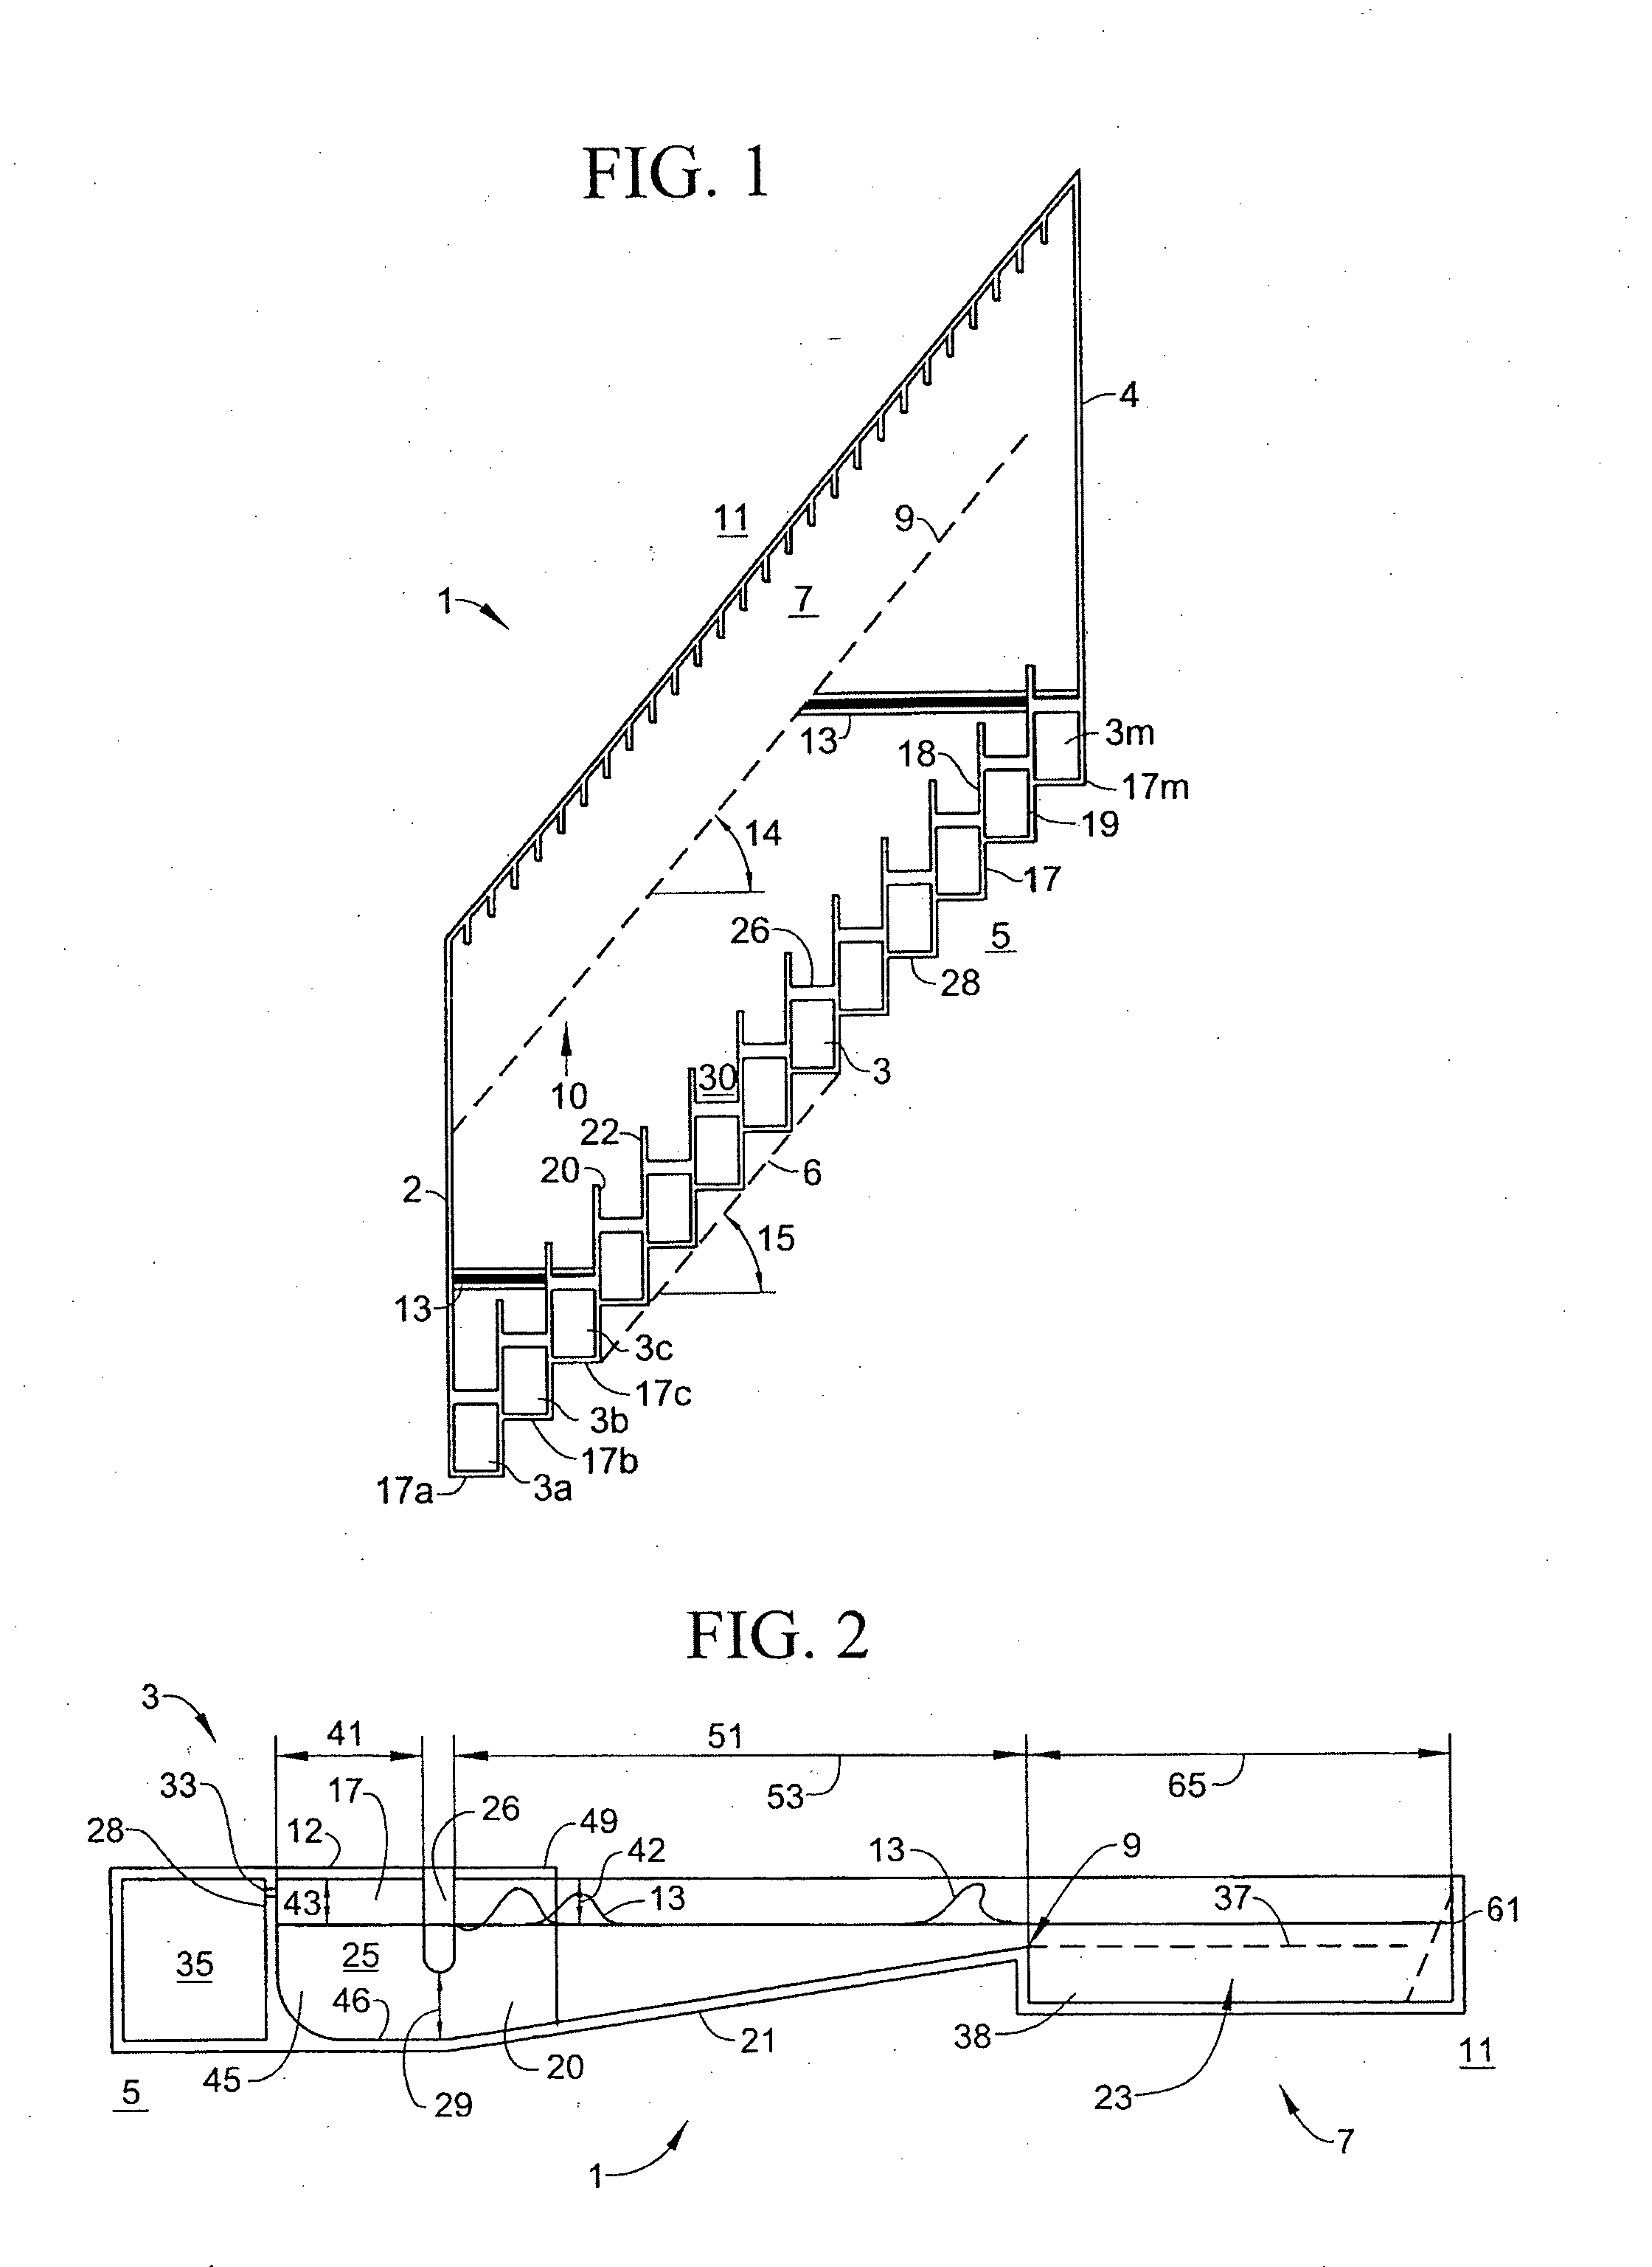 Method and apparatus for producing progressive waves suitable for surfing using staggered wave generators in sequence